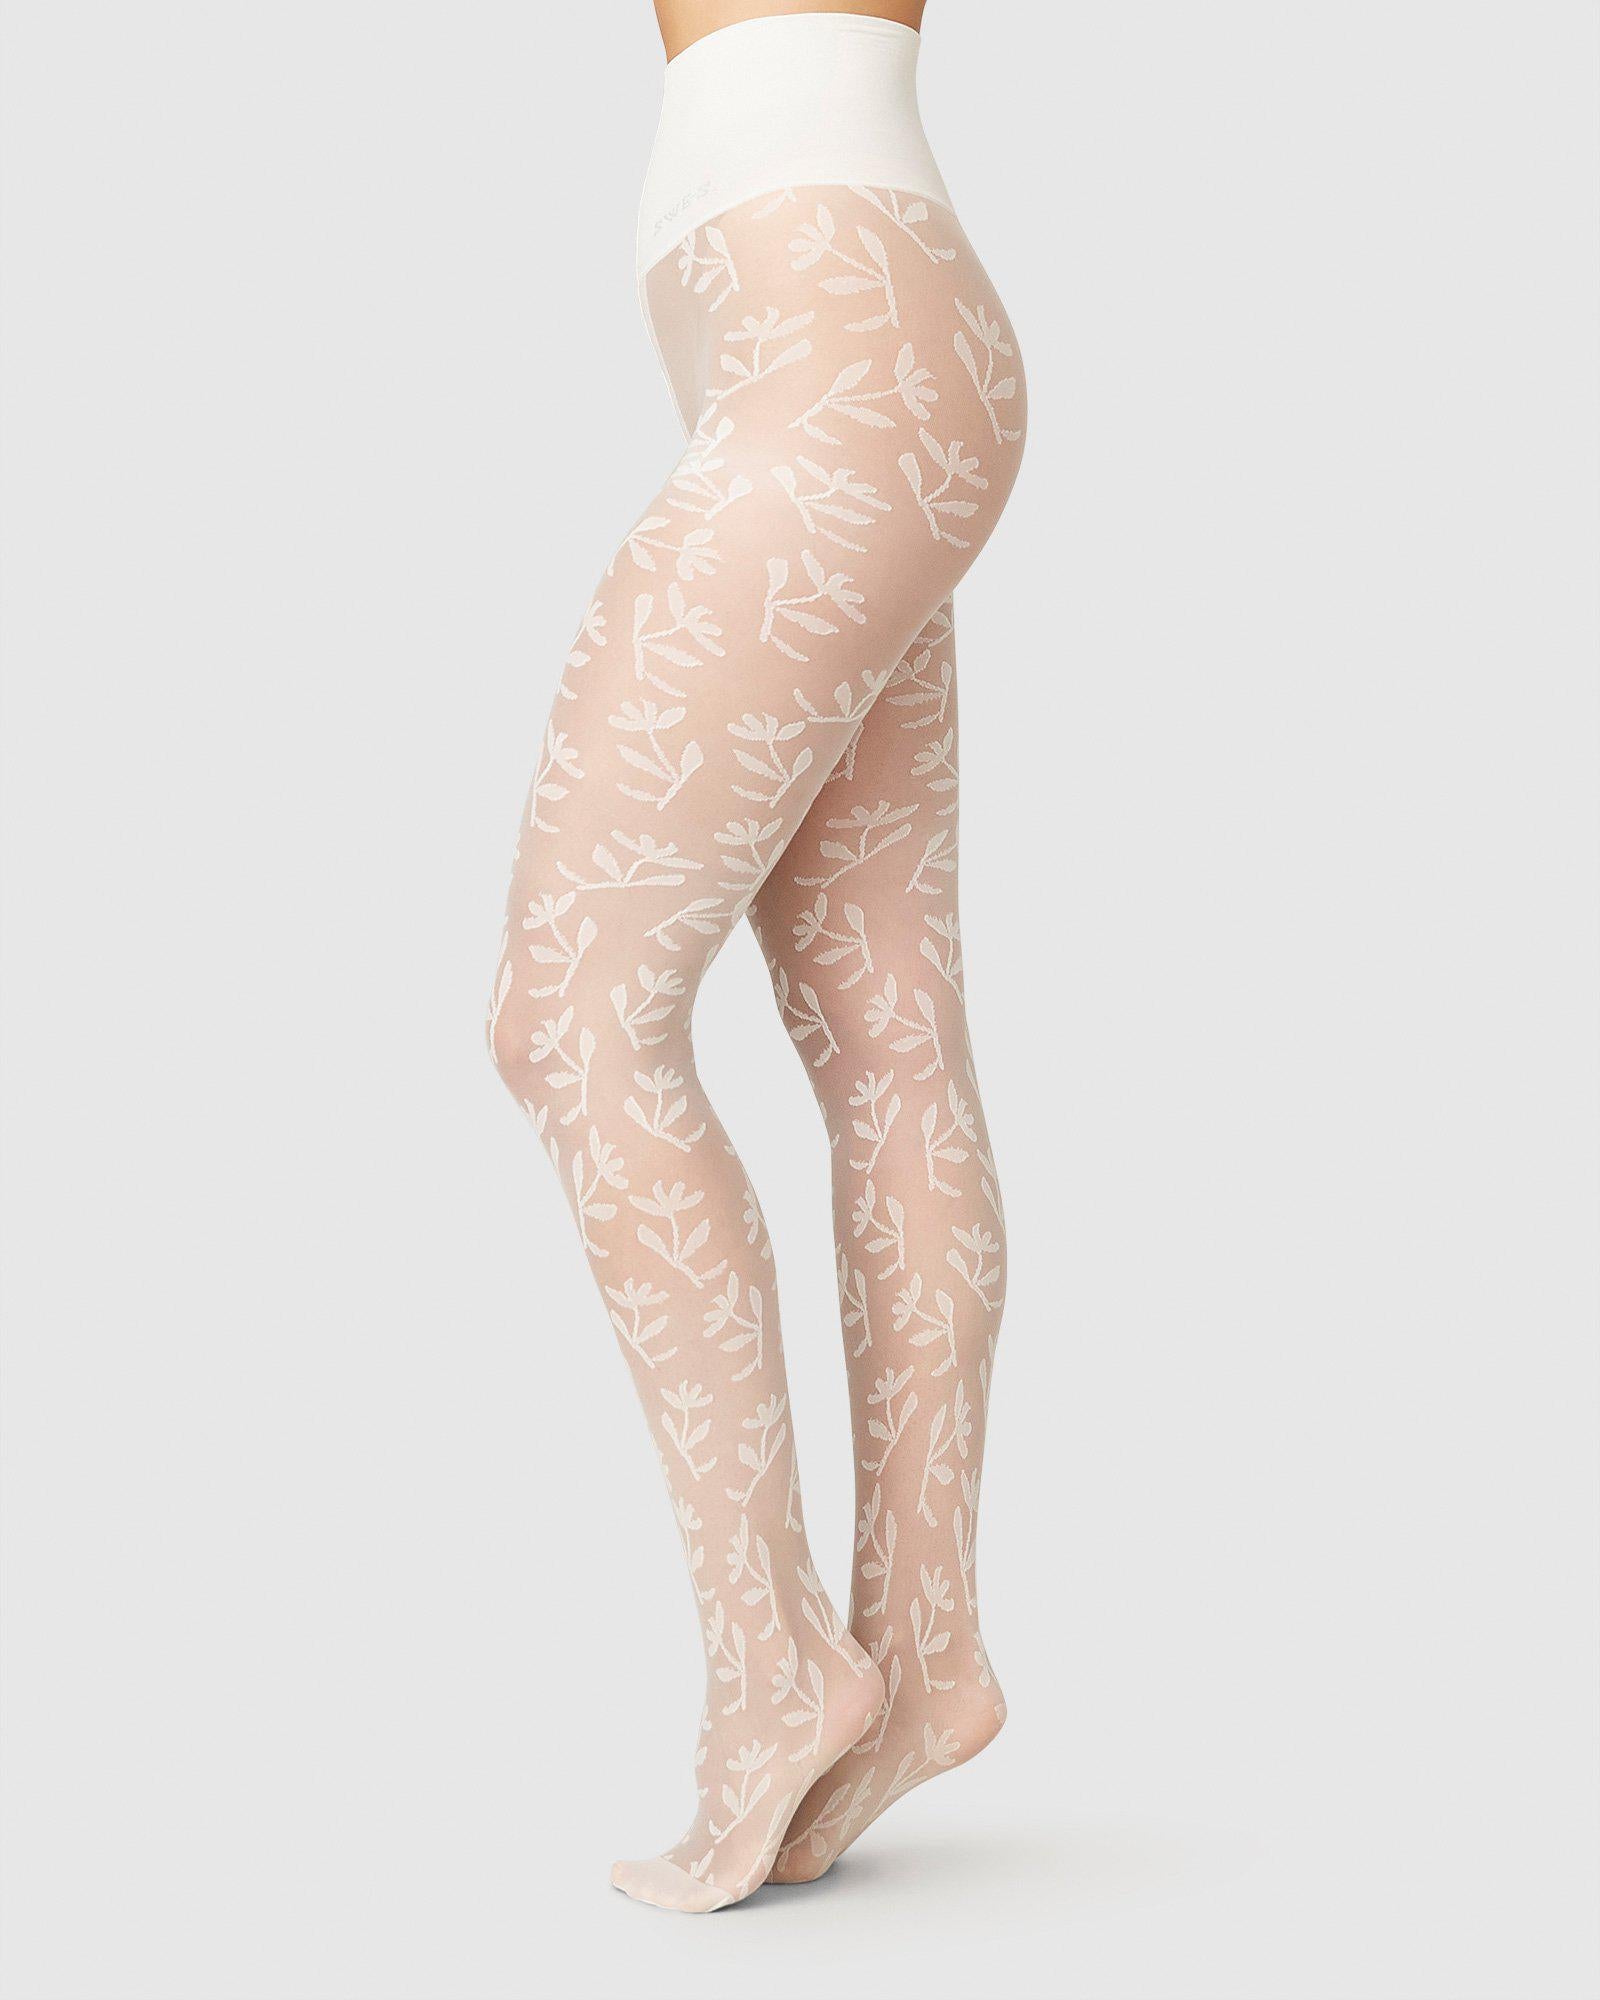 Floral-Patterned Fishnet Tights - Calzedonia